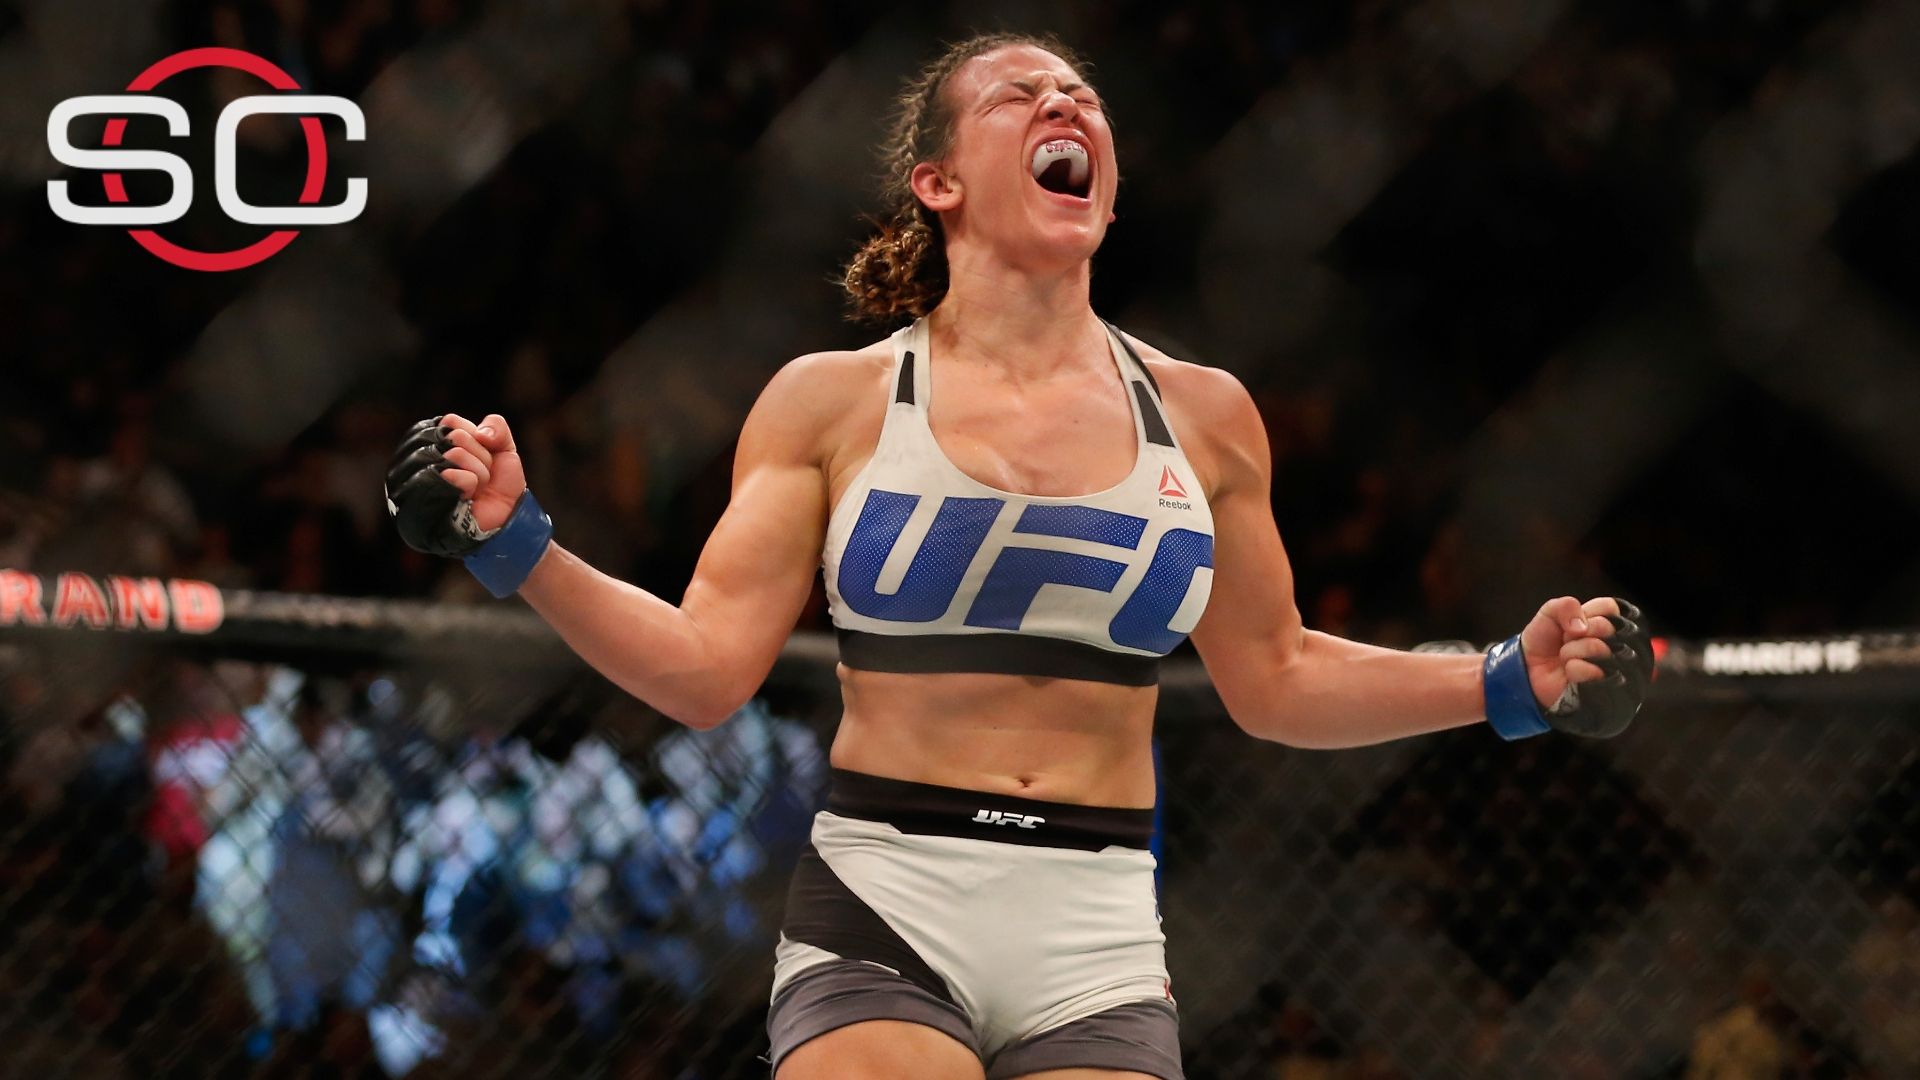 Miesha Tate to Host an After-Fight Party at Sapphire Las Vegas following  UFC 200